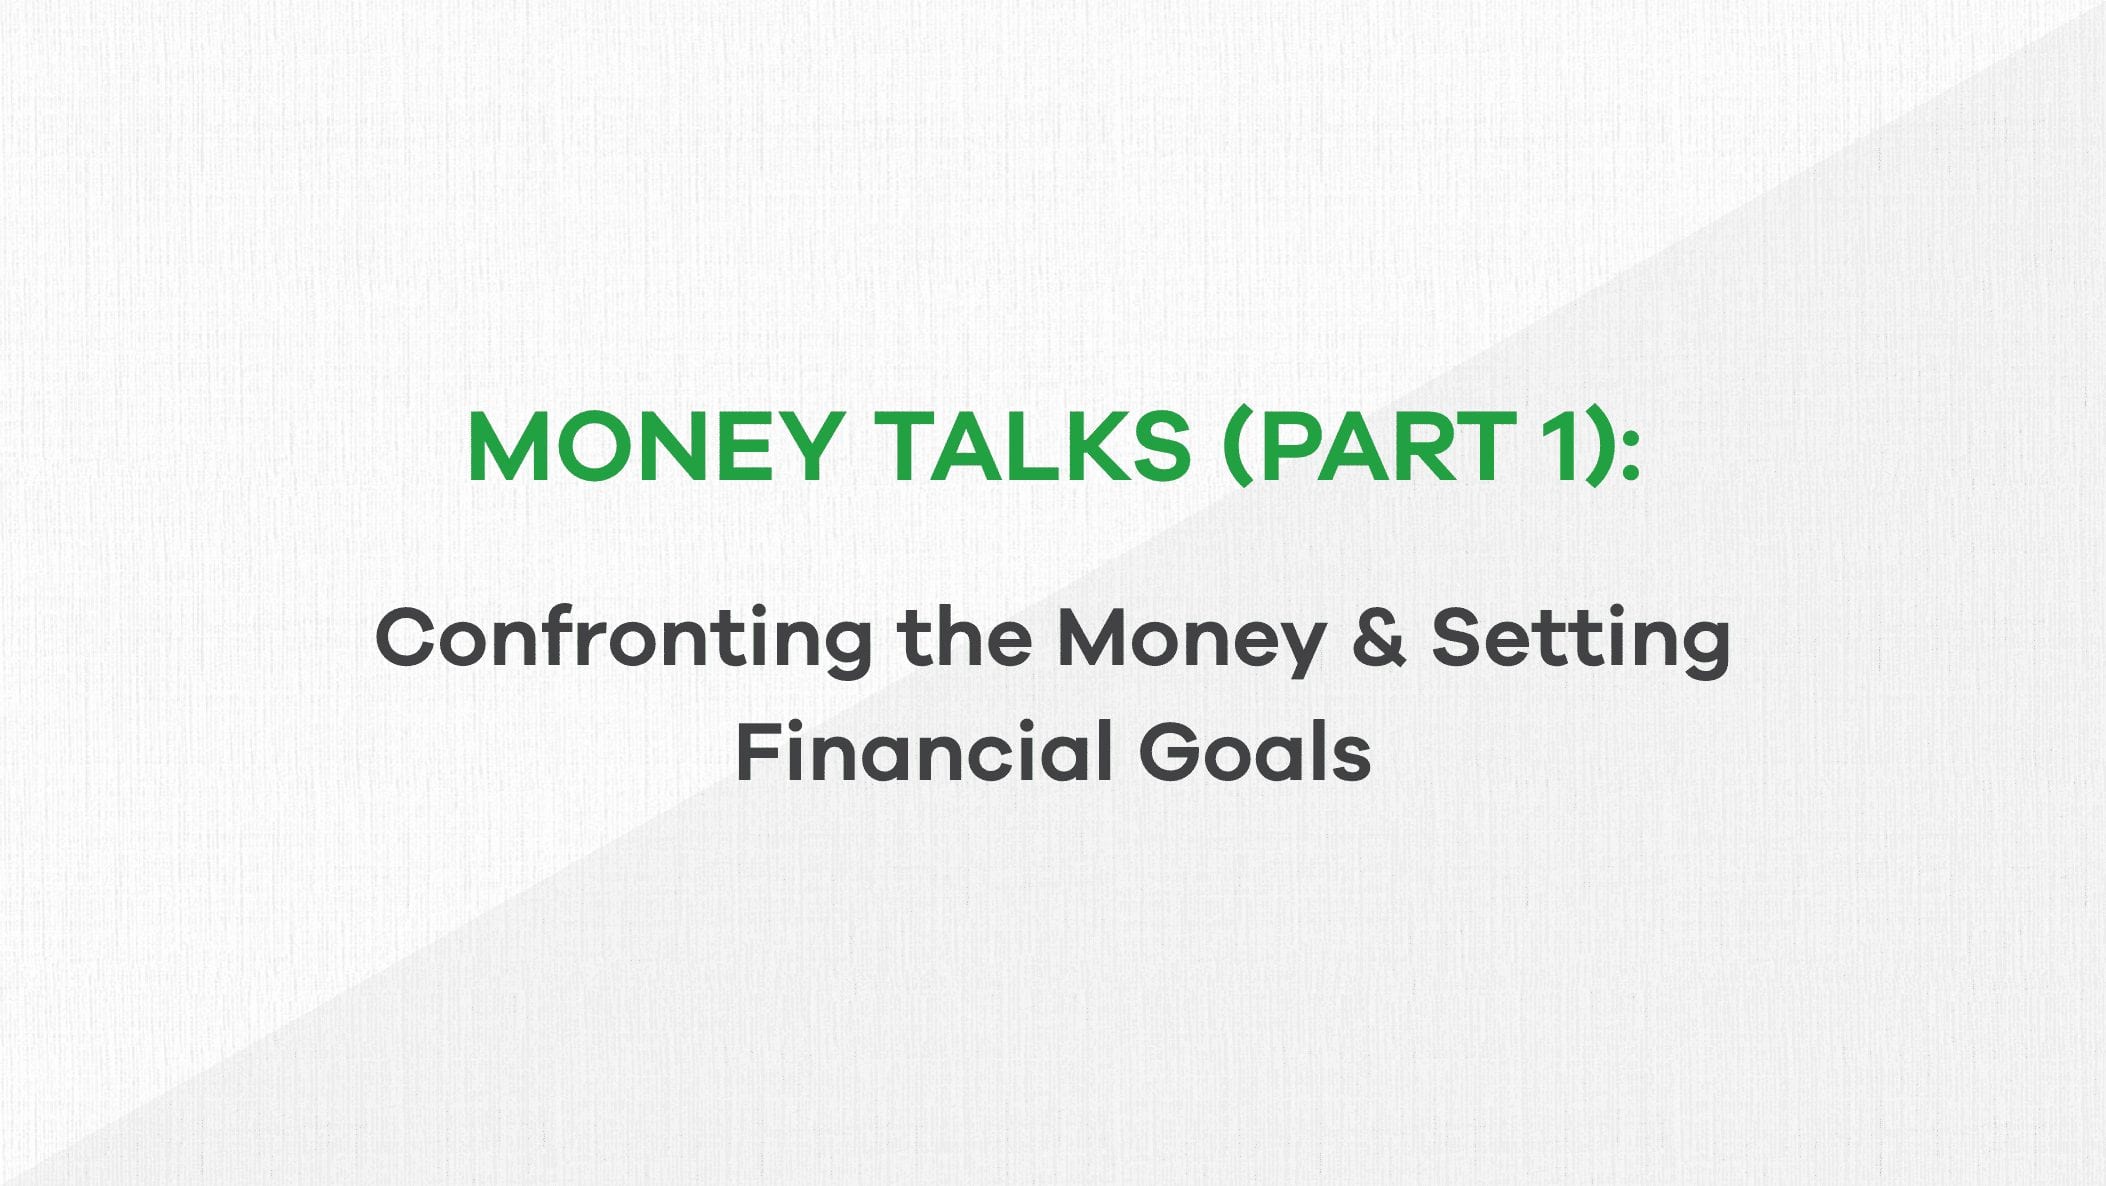 money talks part 1 - confronting money and setting financial goals